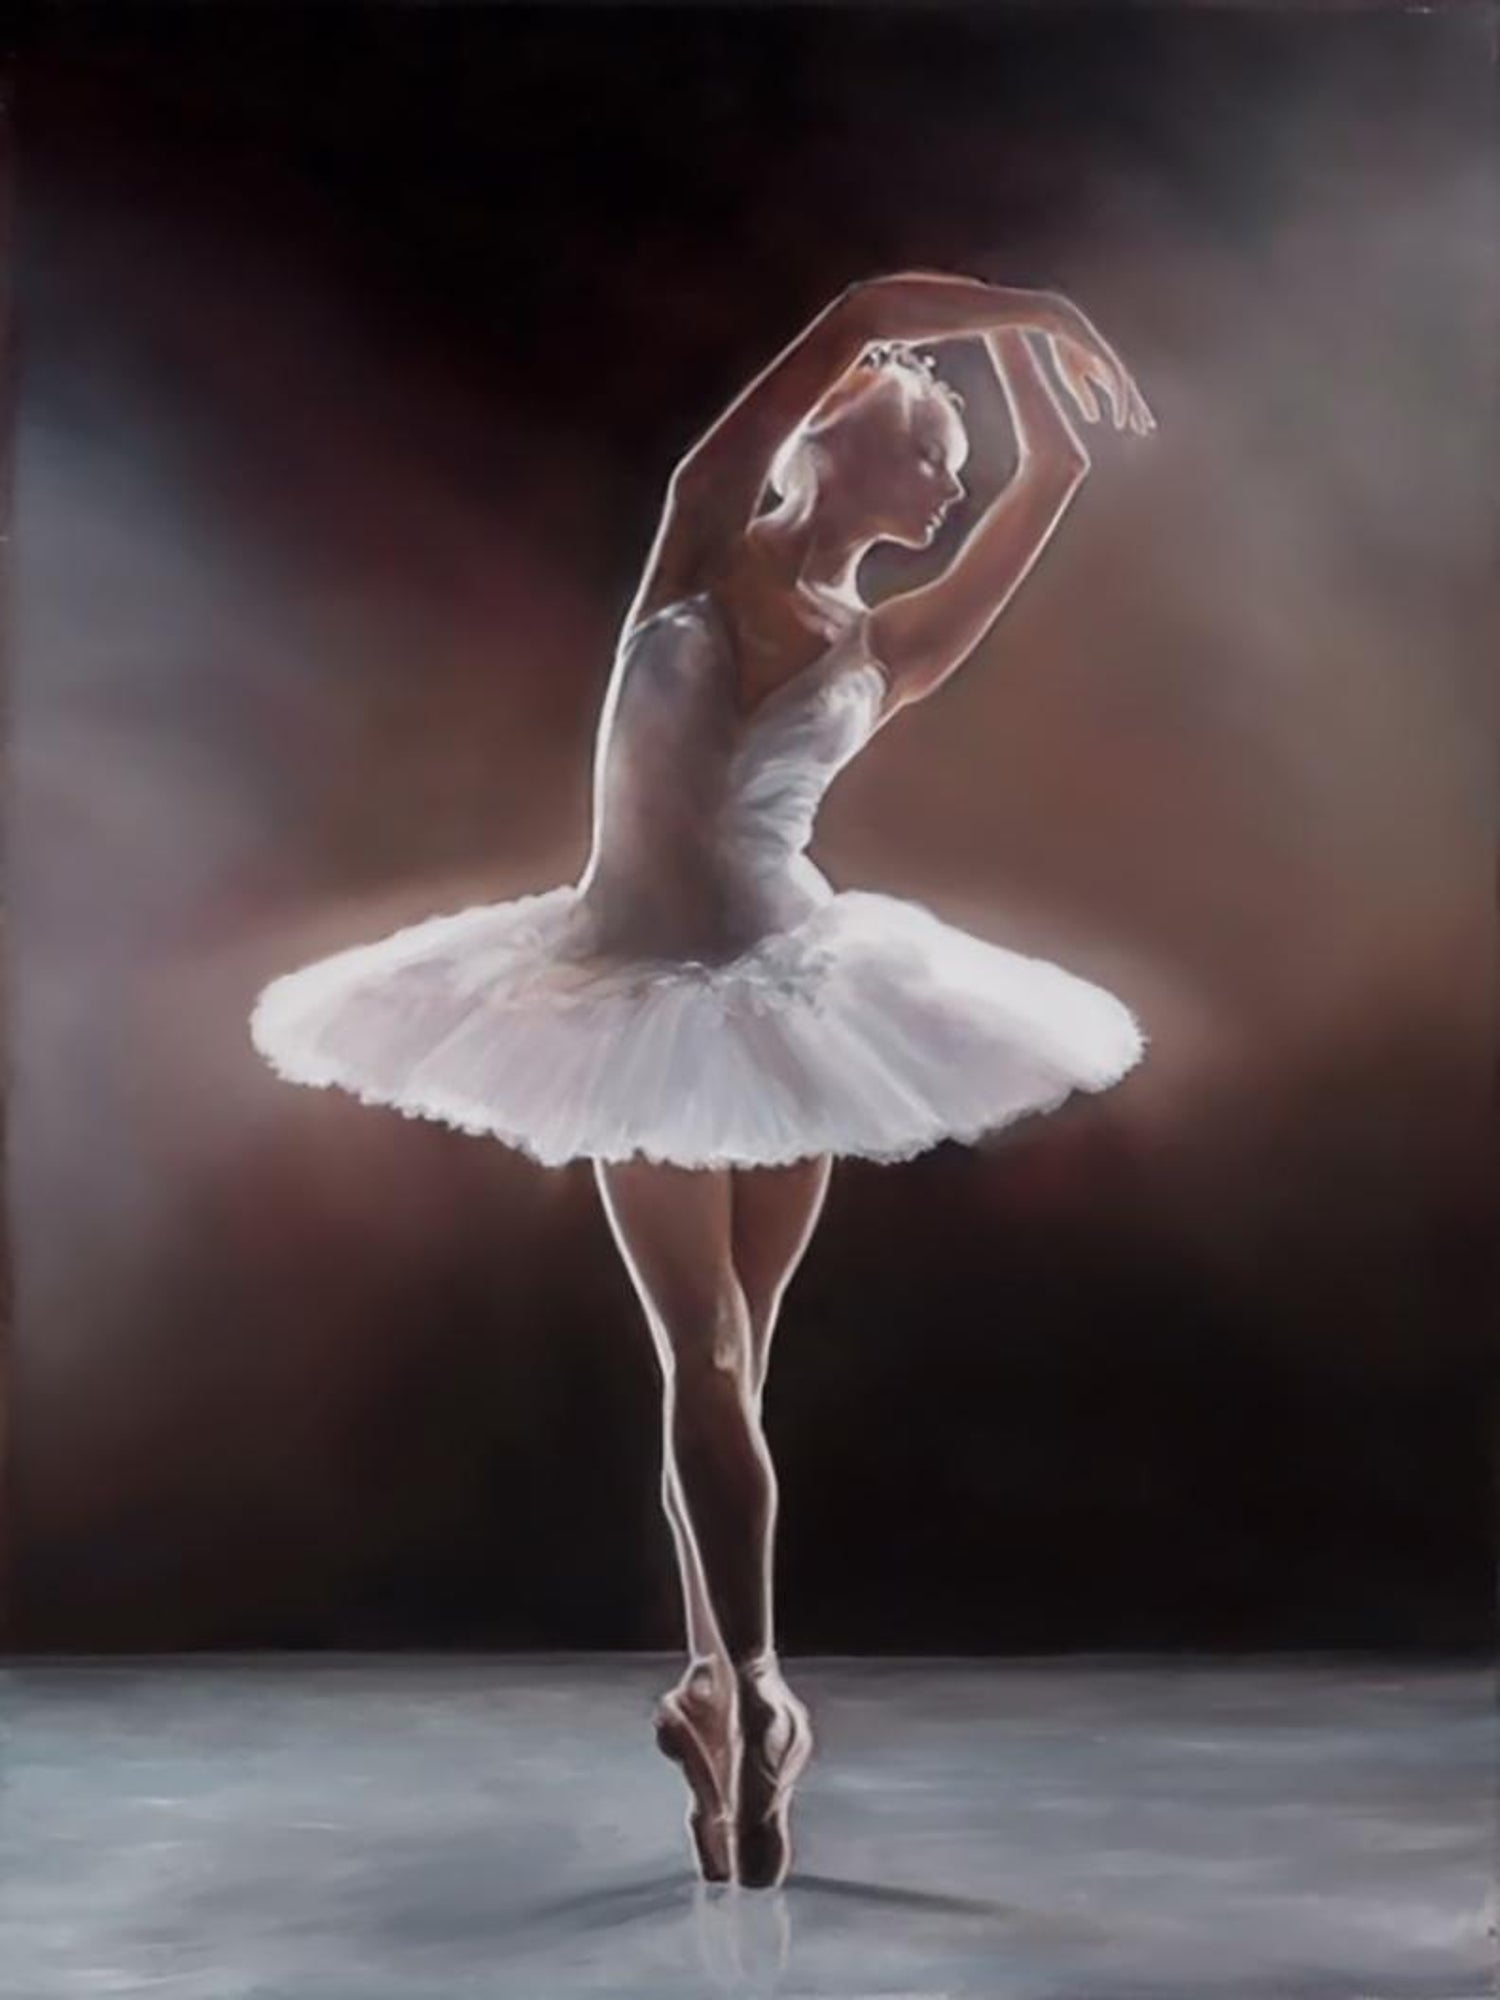 Marie Channer - Marie Channer, "Grace", 24x18 Ballet Dancer Oil Painting on  Canvas For Sale at 1stDibs